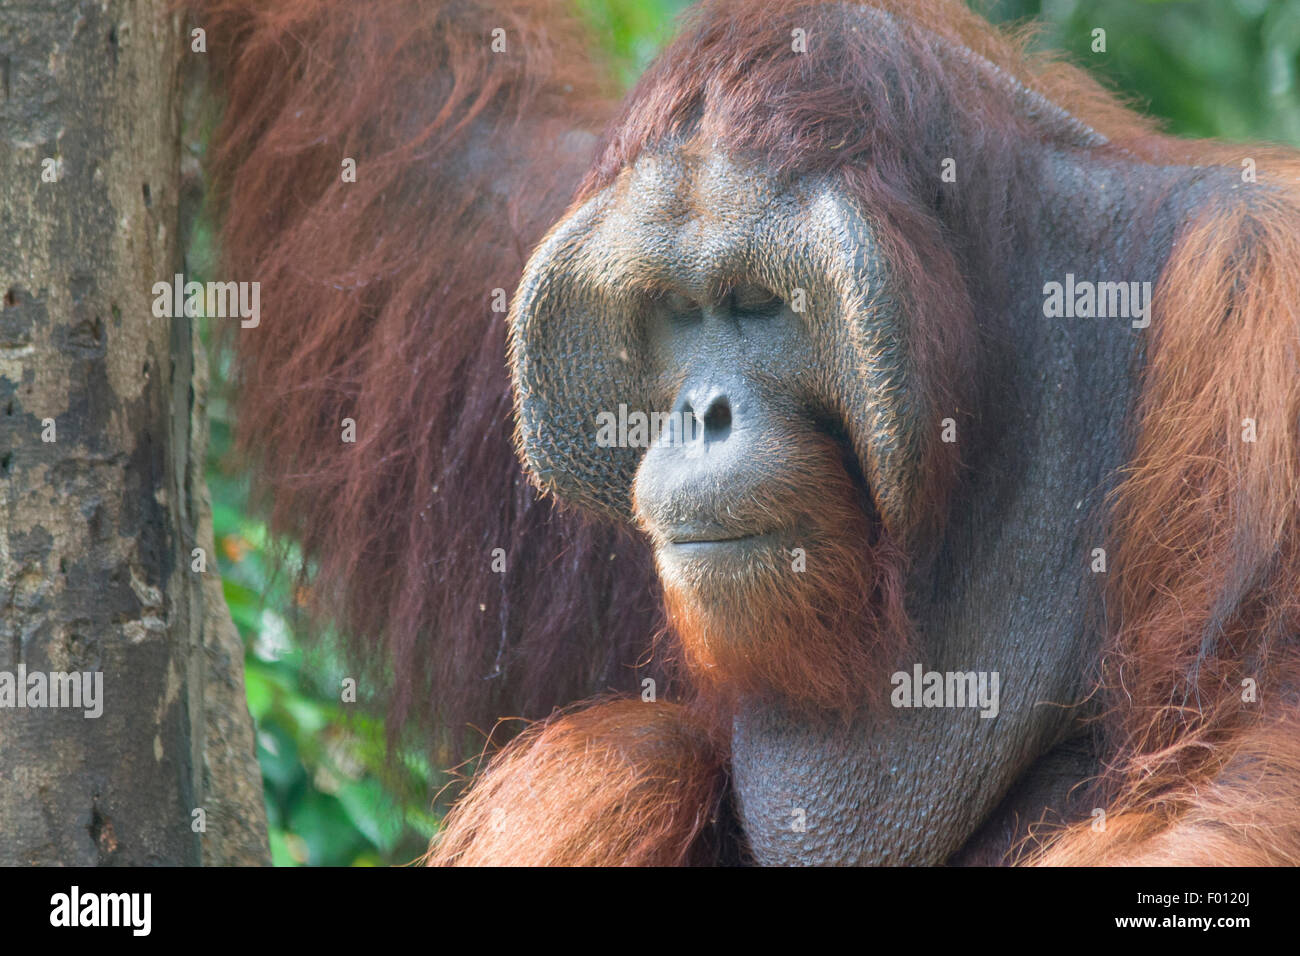 An extremely large male orangutan with the prominent cheek pads, throat pouch, and long hair characteristic of dominant males. Stock Photo